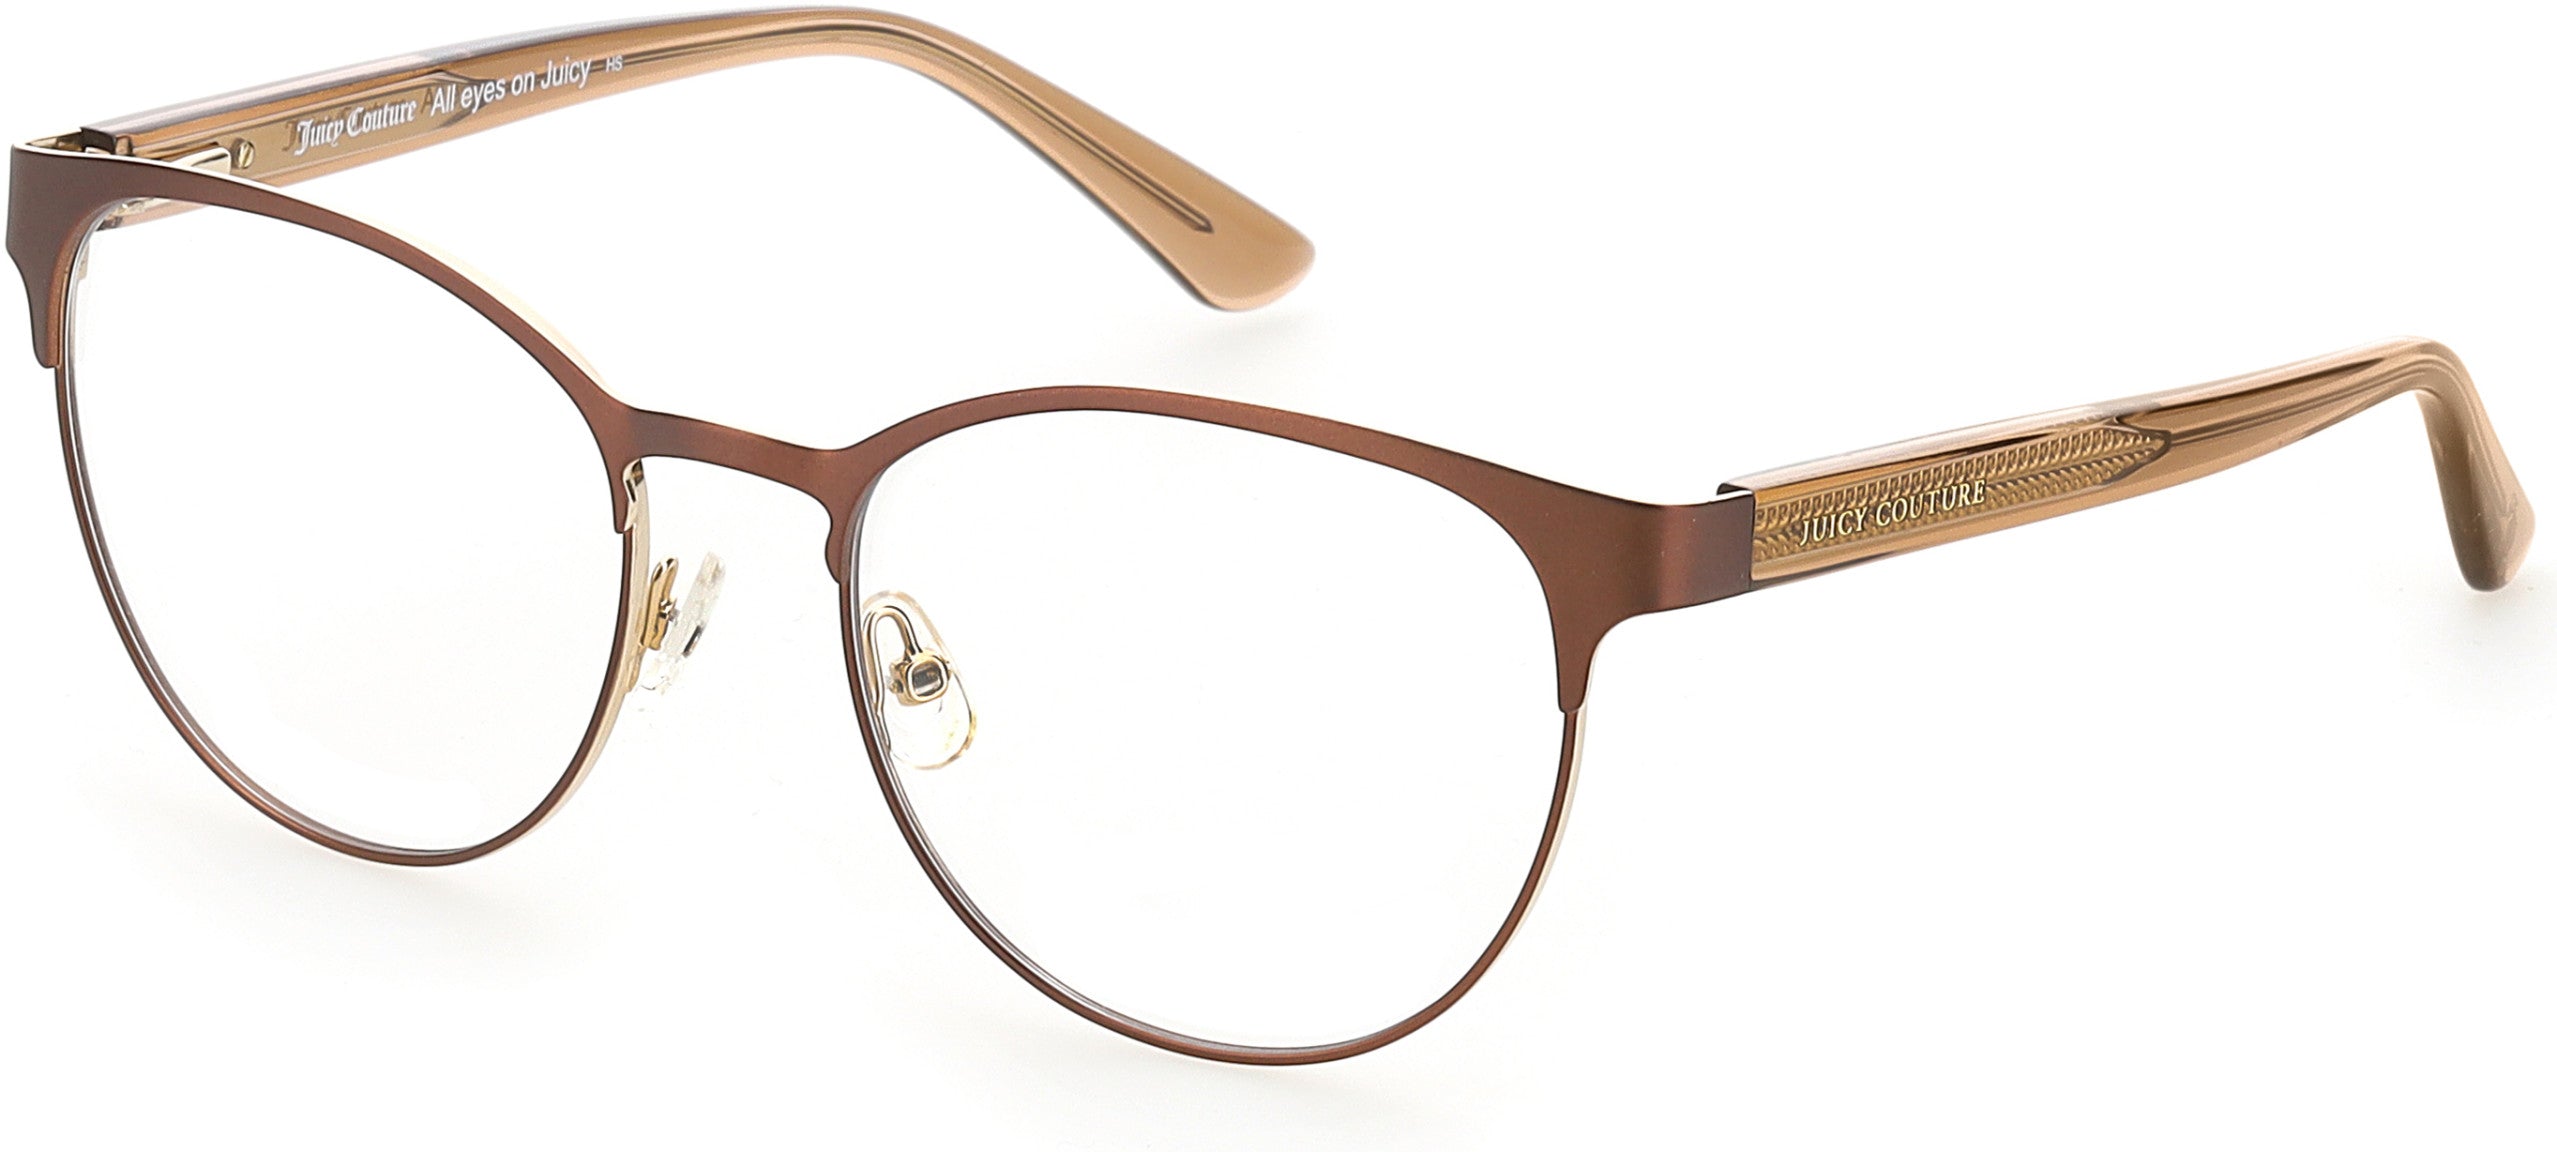 Juicy Couture Juicy 203/G Oval Modified Eyeglasses 04IN-04IN  Matte Brown (00 Demo Lens)